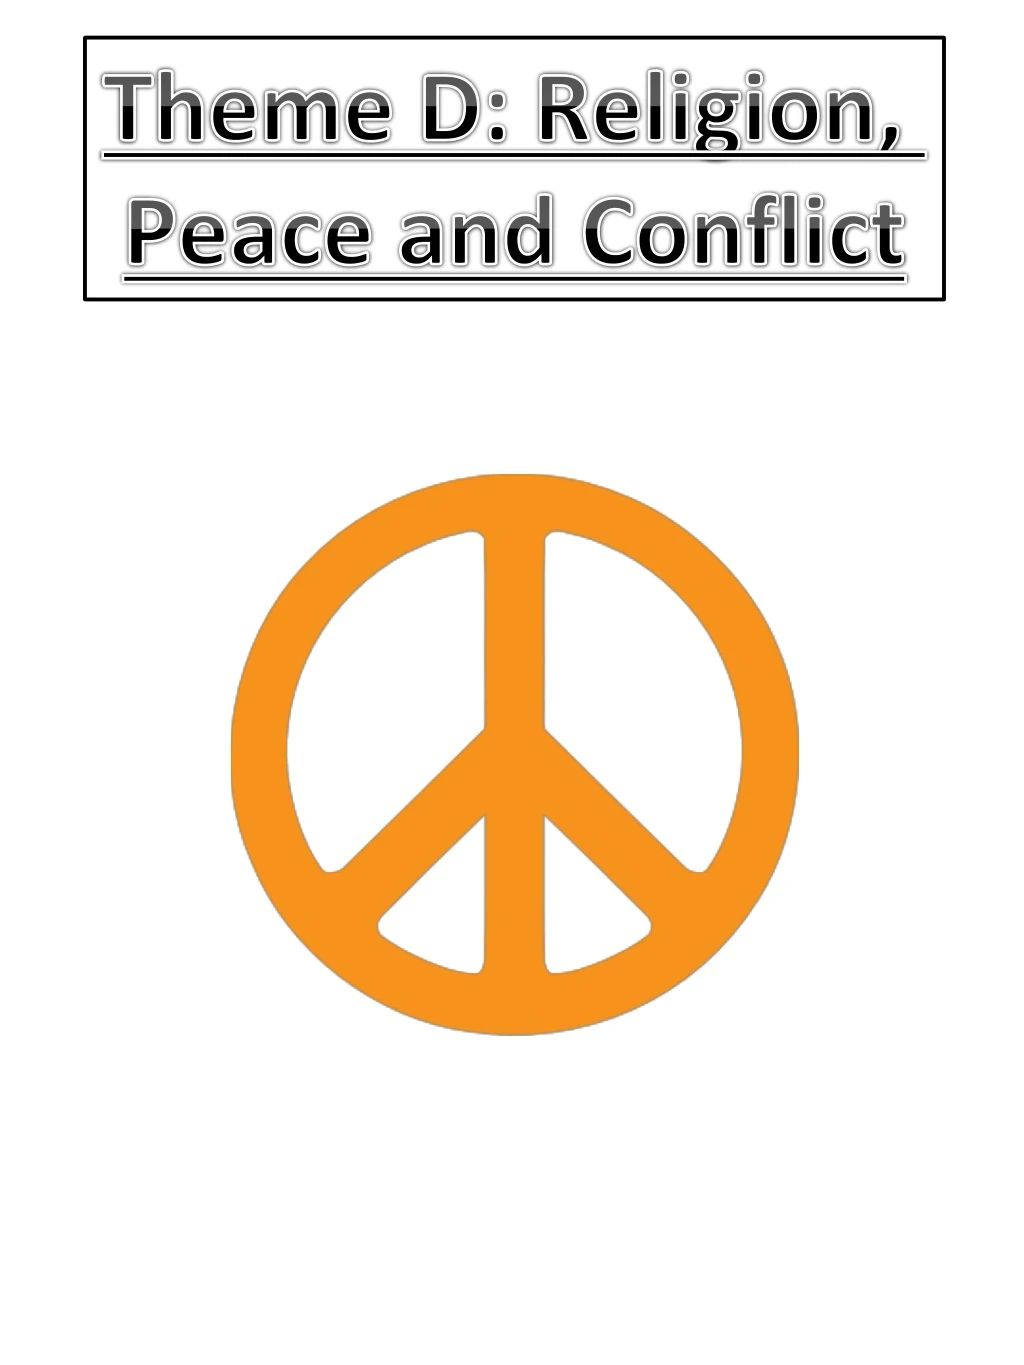 theme d religion peace and conflict